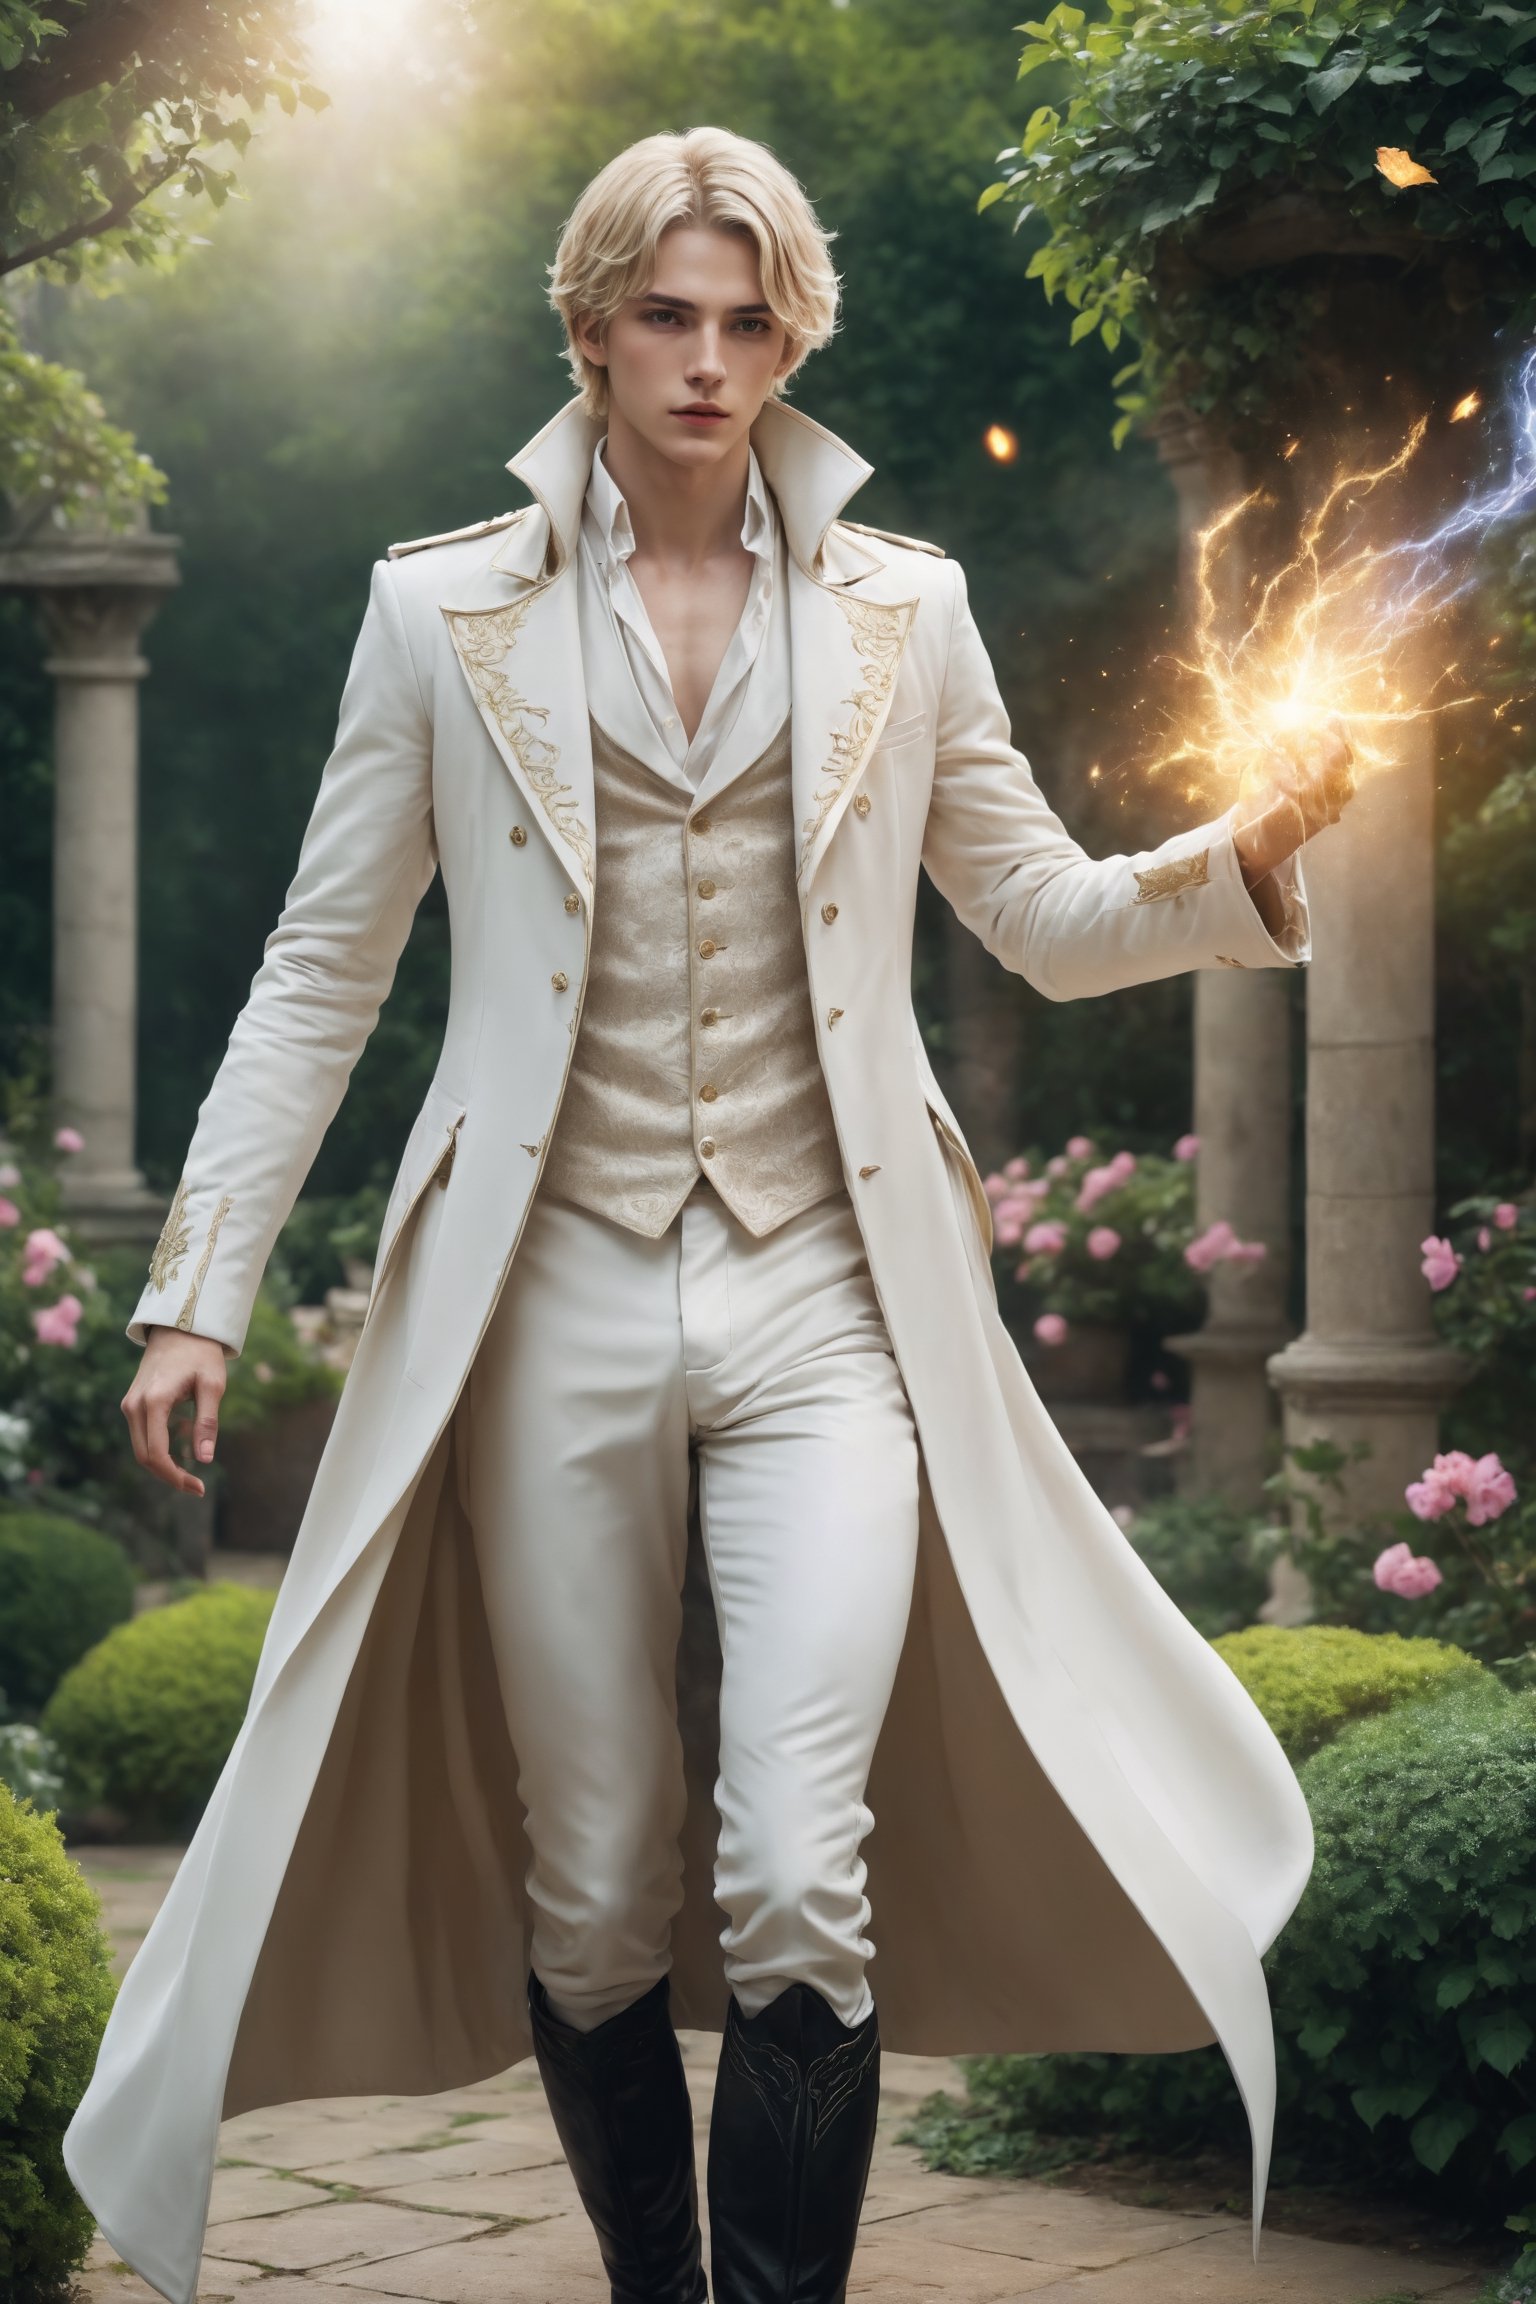 create a hyper-realistic image of a ((14 years old:1.7)) tall and handsome European prince, young handsome wizard fighting with magic in the garden,  8k, high detailed, sharp focus,more detail XL,Movie Still,(side body view:1.9), black boots,  (whole image within frame),  ((blond shade haircut)), cinematic moviemaker , ((casting spell:1.4)), style,Stylish,abmhandsomeguy, ((full body shot:1.9)), topless,aesthetic portrait,LegendDarkFantasy, ((pale skin)) ,aw0k euphoricred style,cute blond boy, white long coat, 